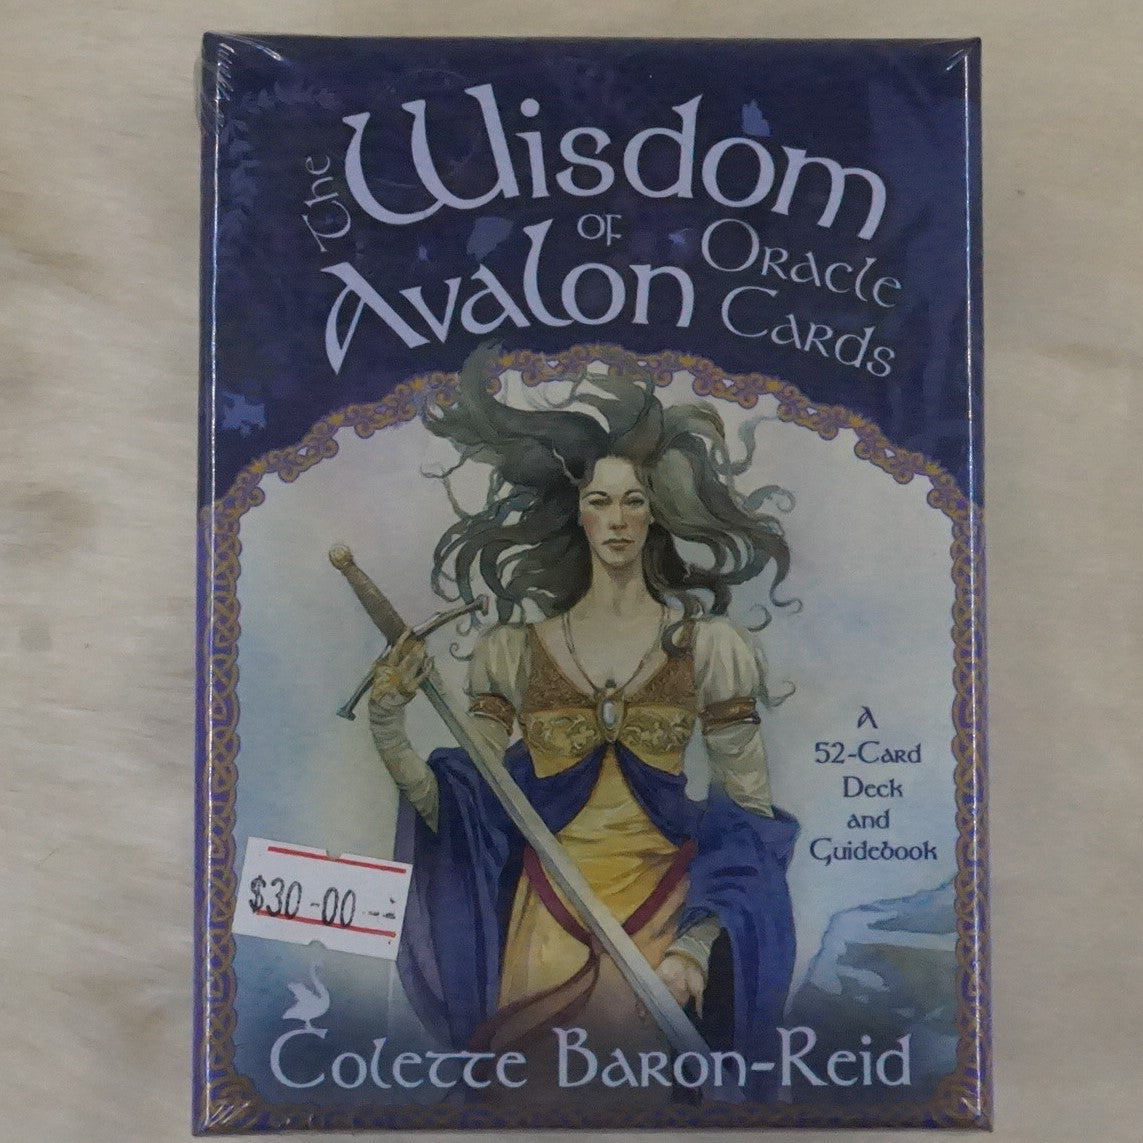 The Wisdom Of The Avalon Oracle Card.